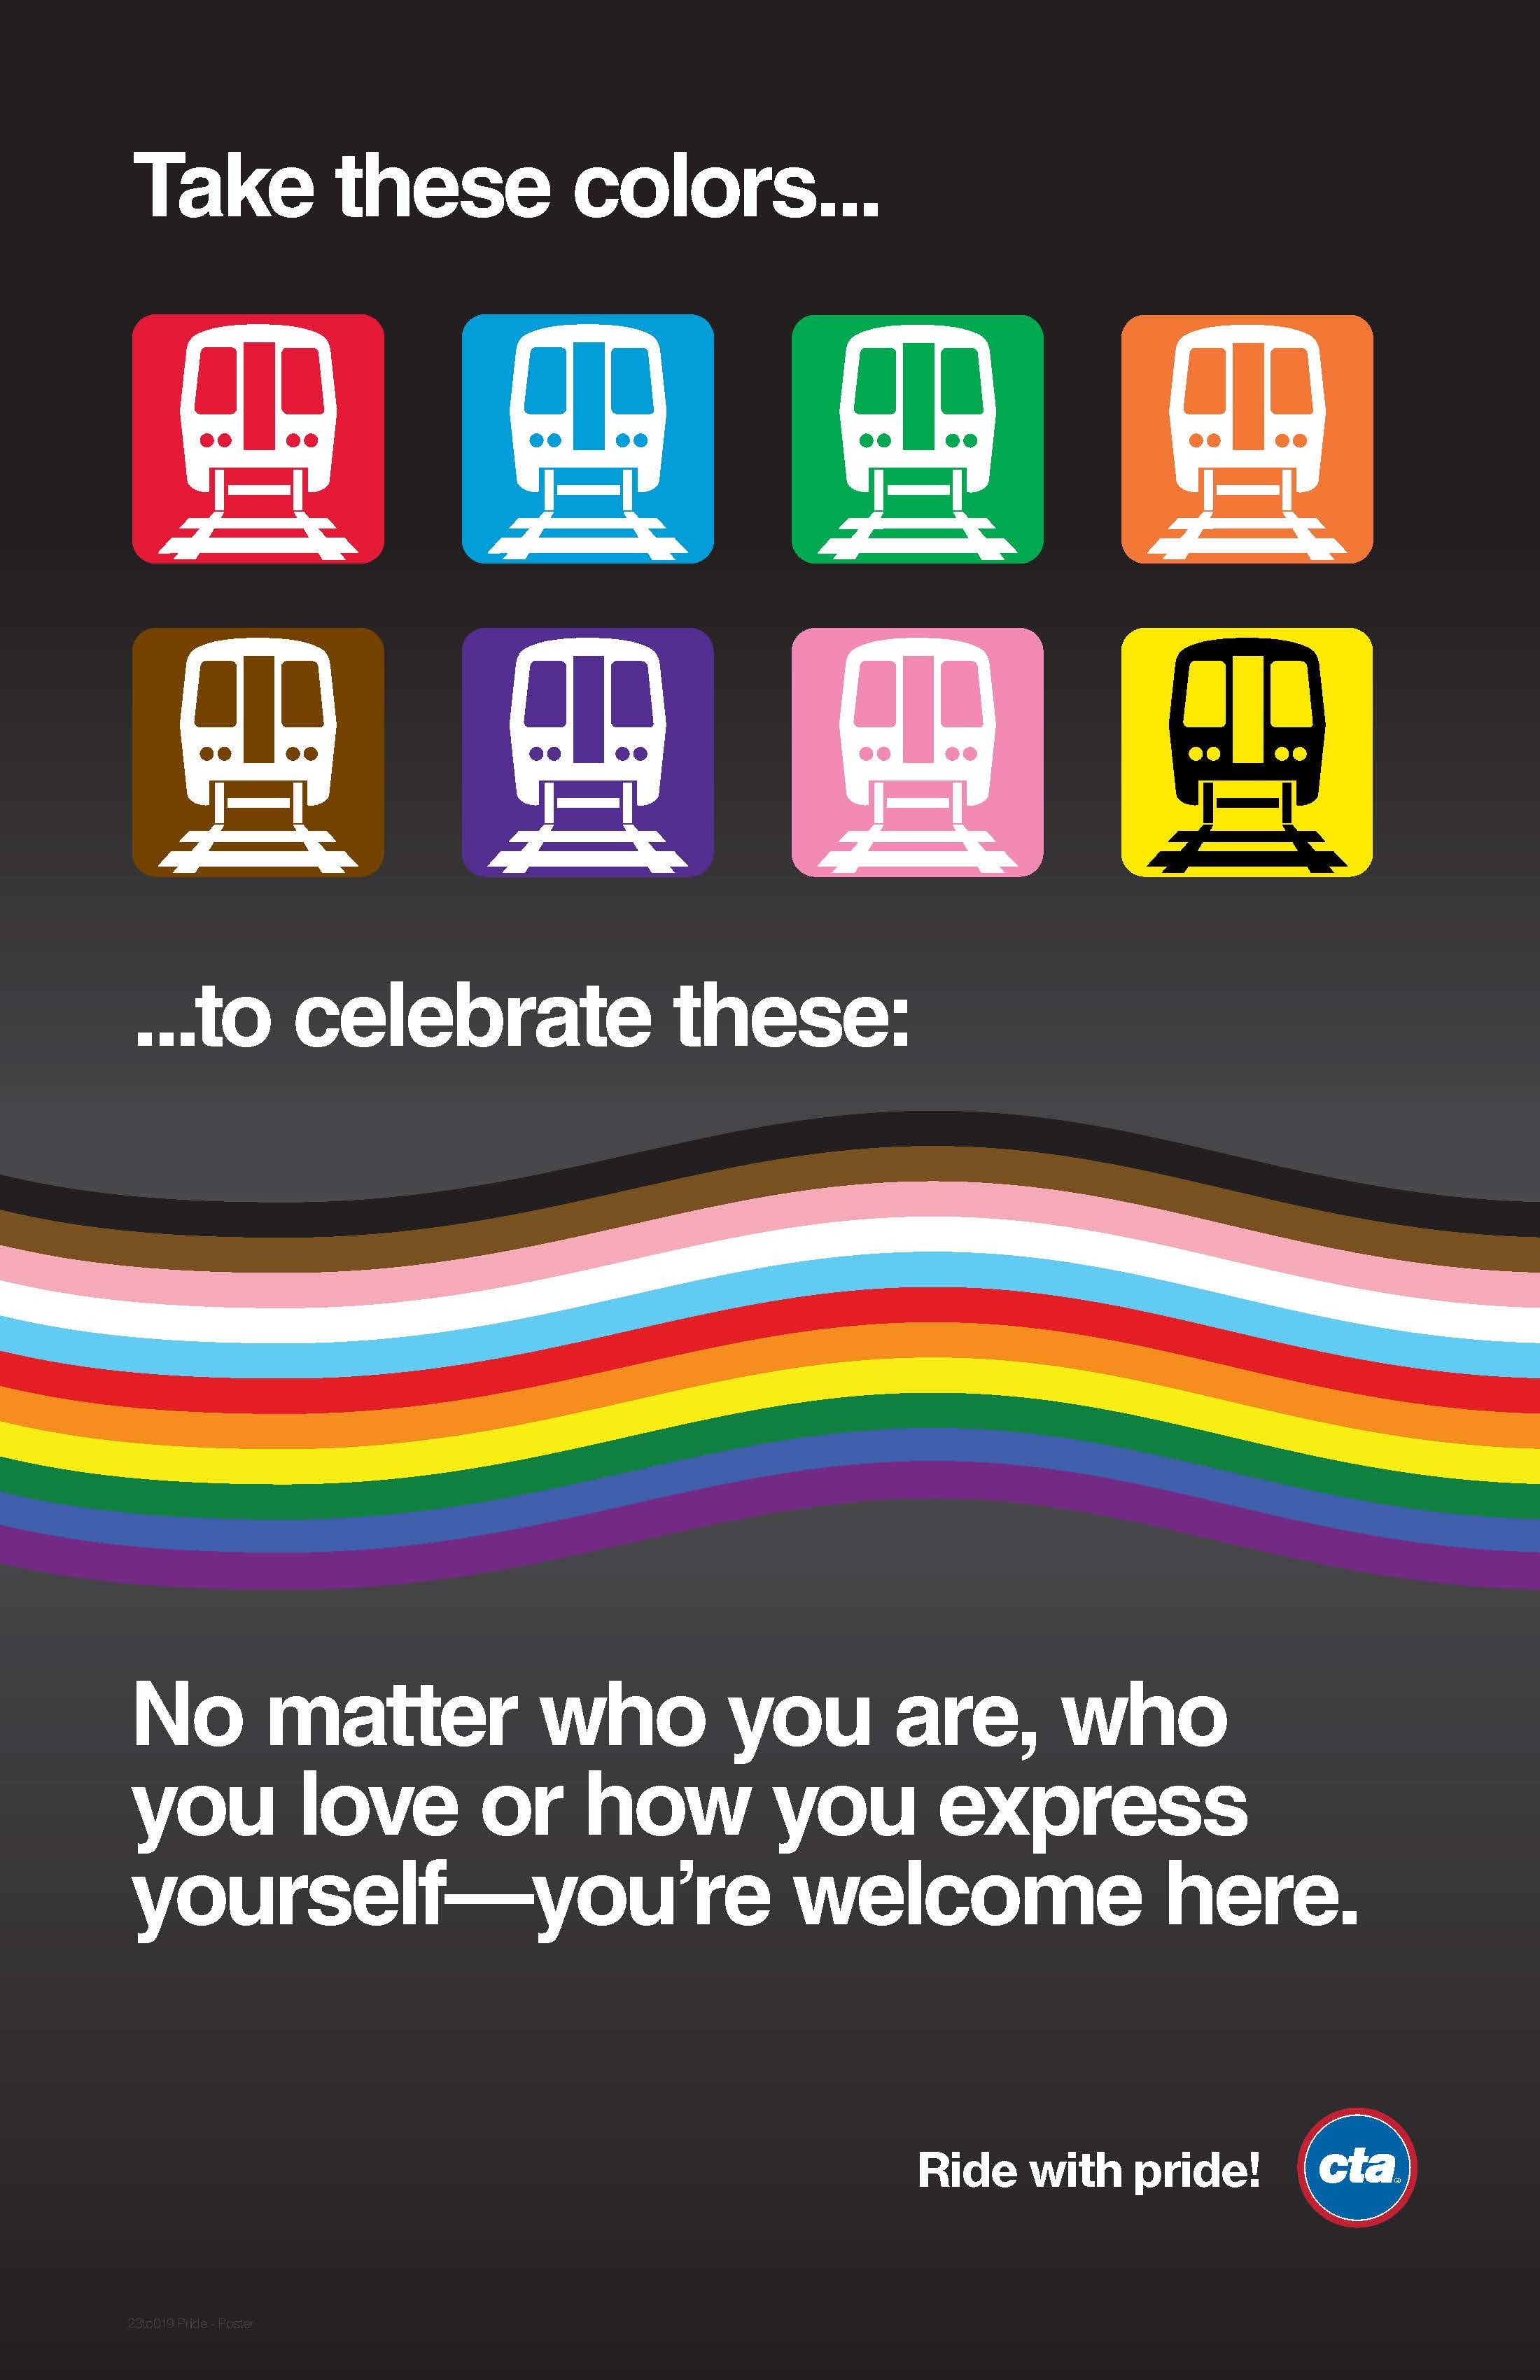 Poster with multi-colored train icons. Take these colors to celebrate these colors. No matter who you are, who you love or how you express yourself, you’re welcome here.